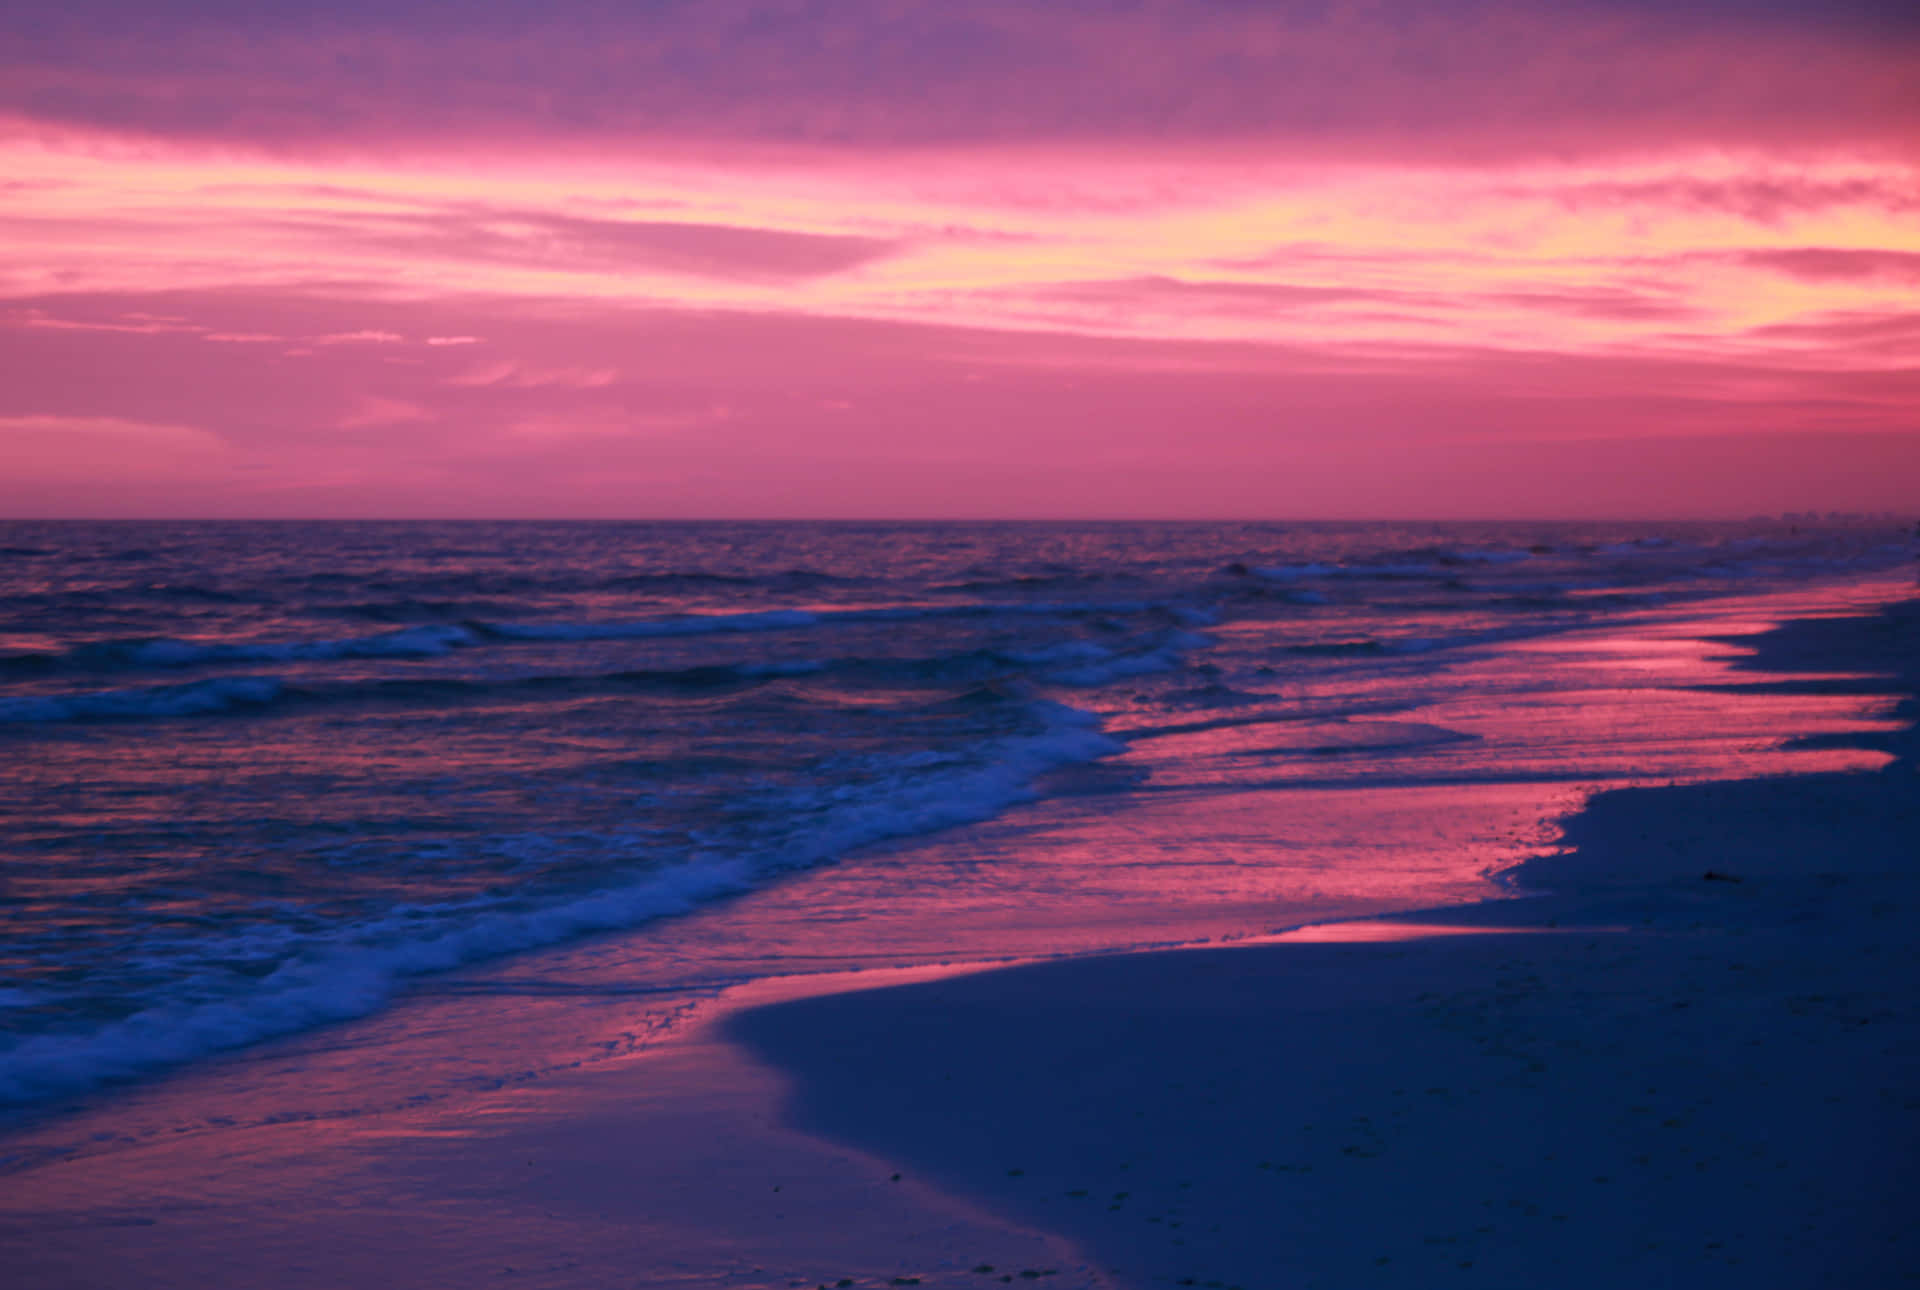 A beautiful beach sunset takes your breath away